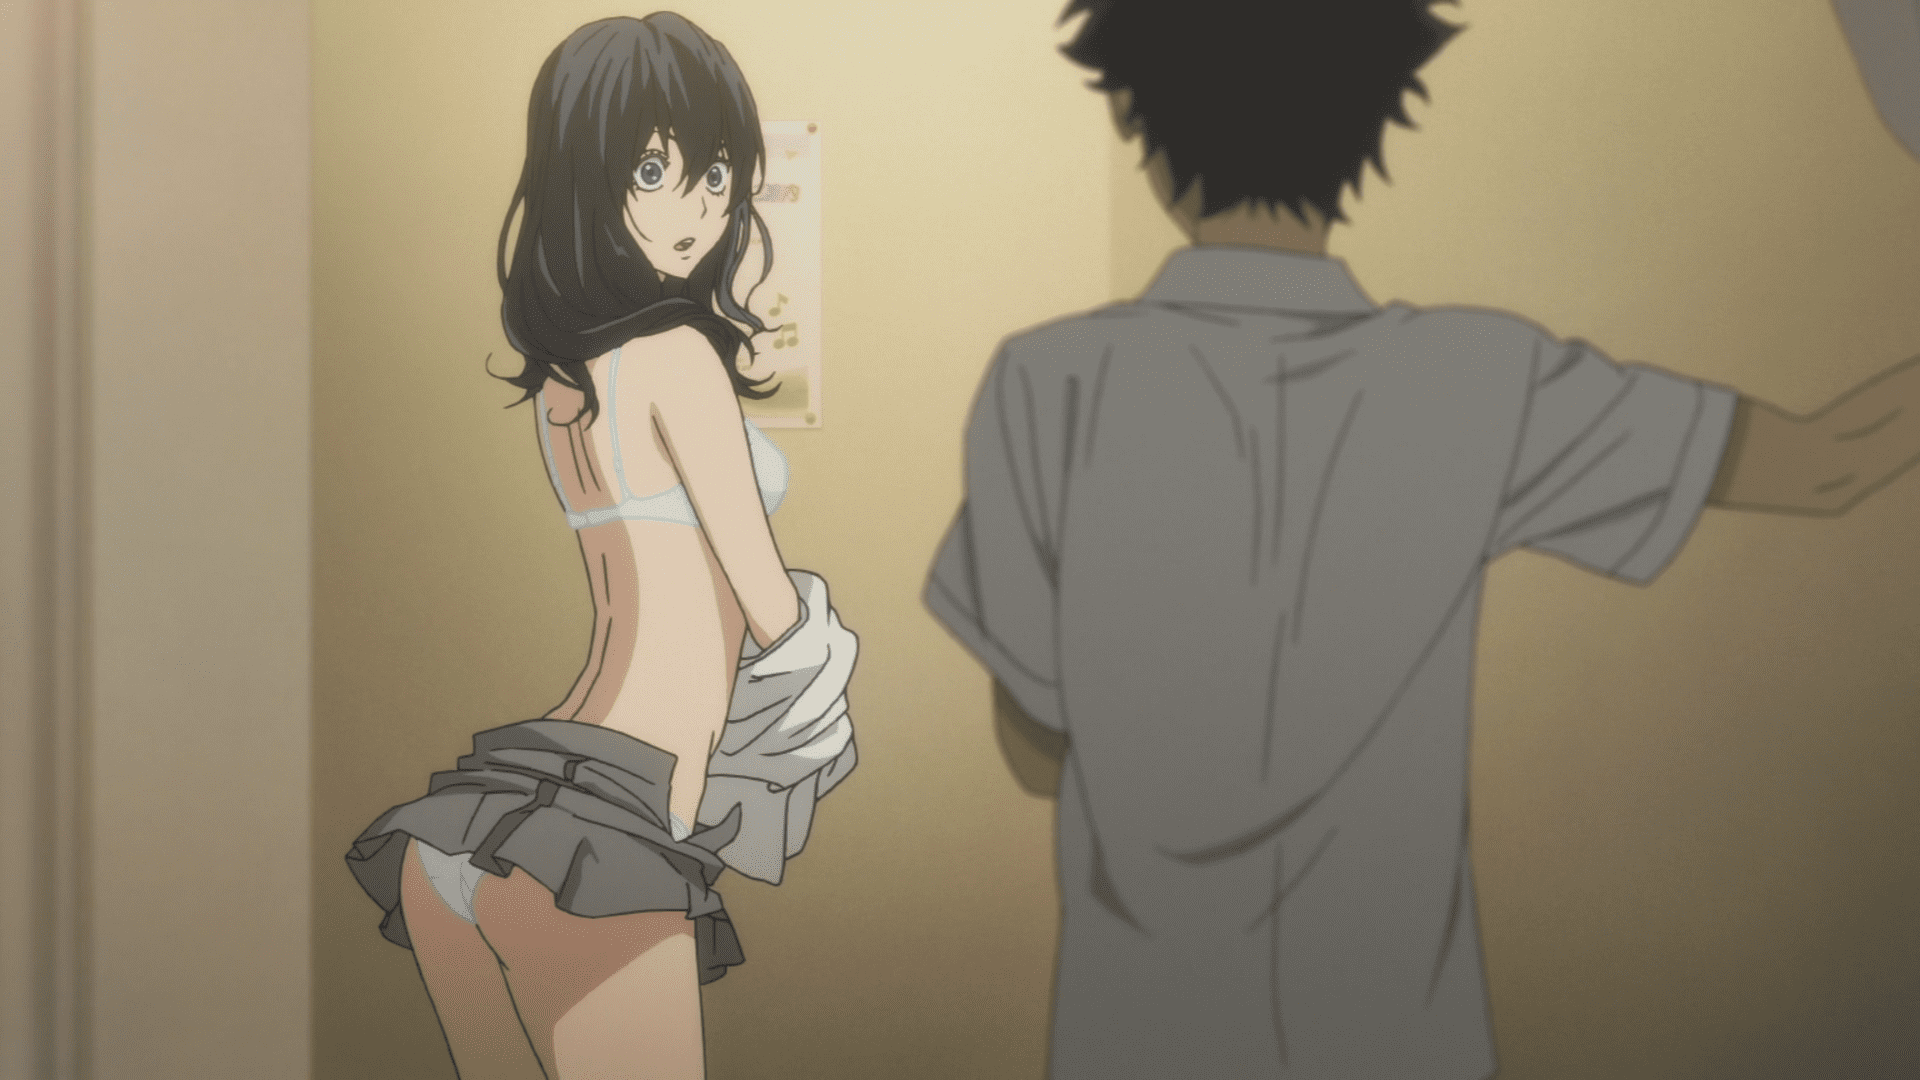 colin bosworth share anime girl taking off shirt photos